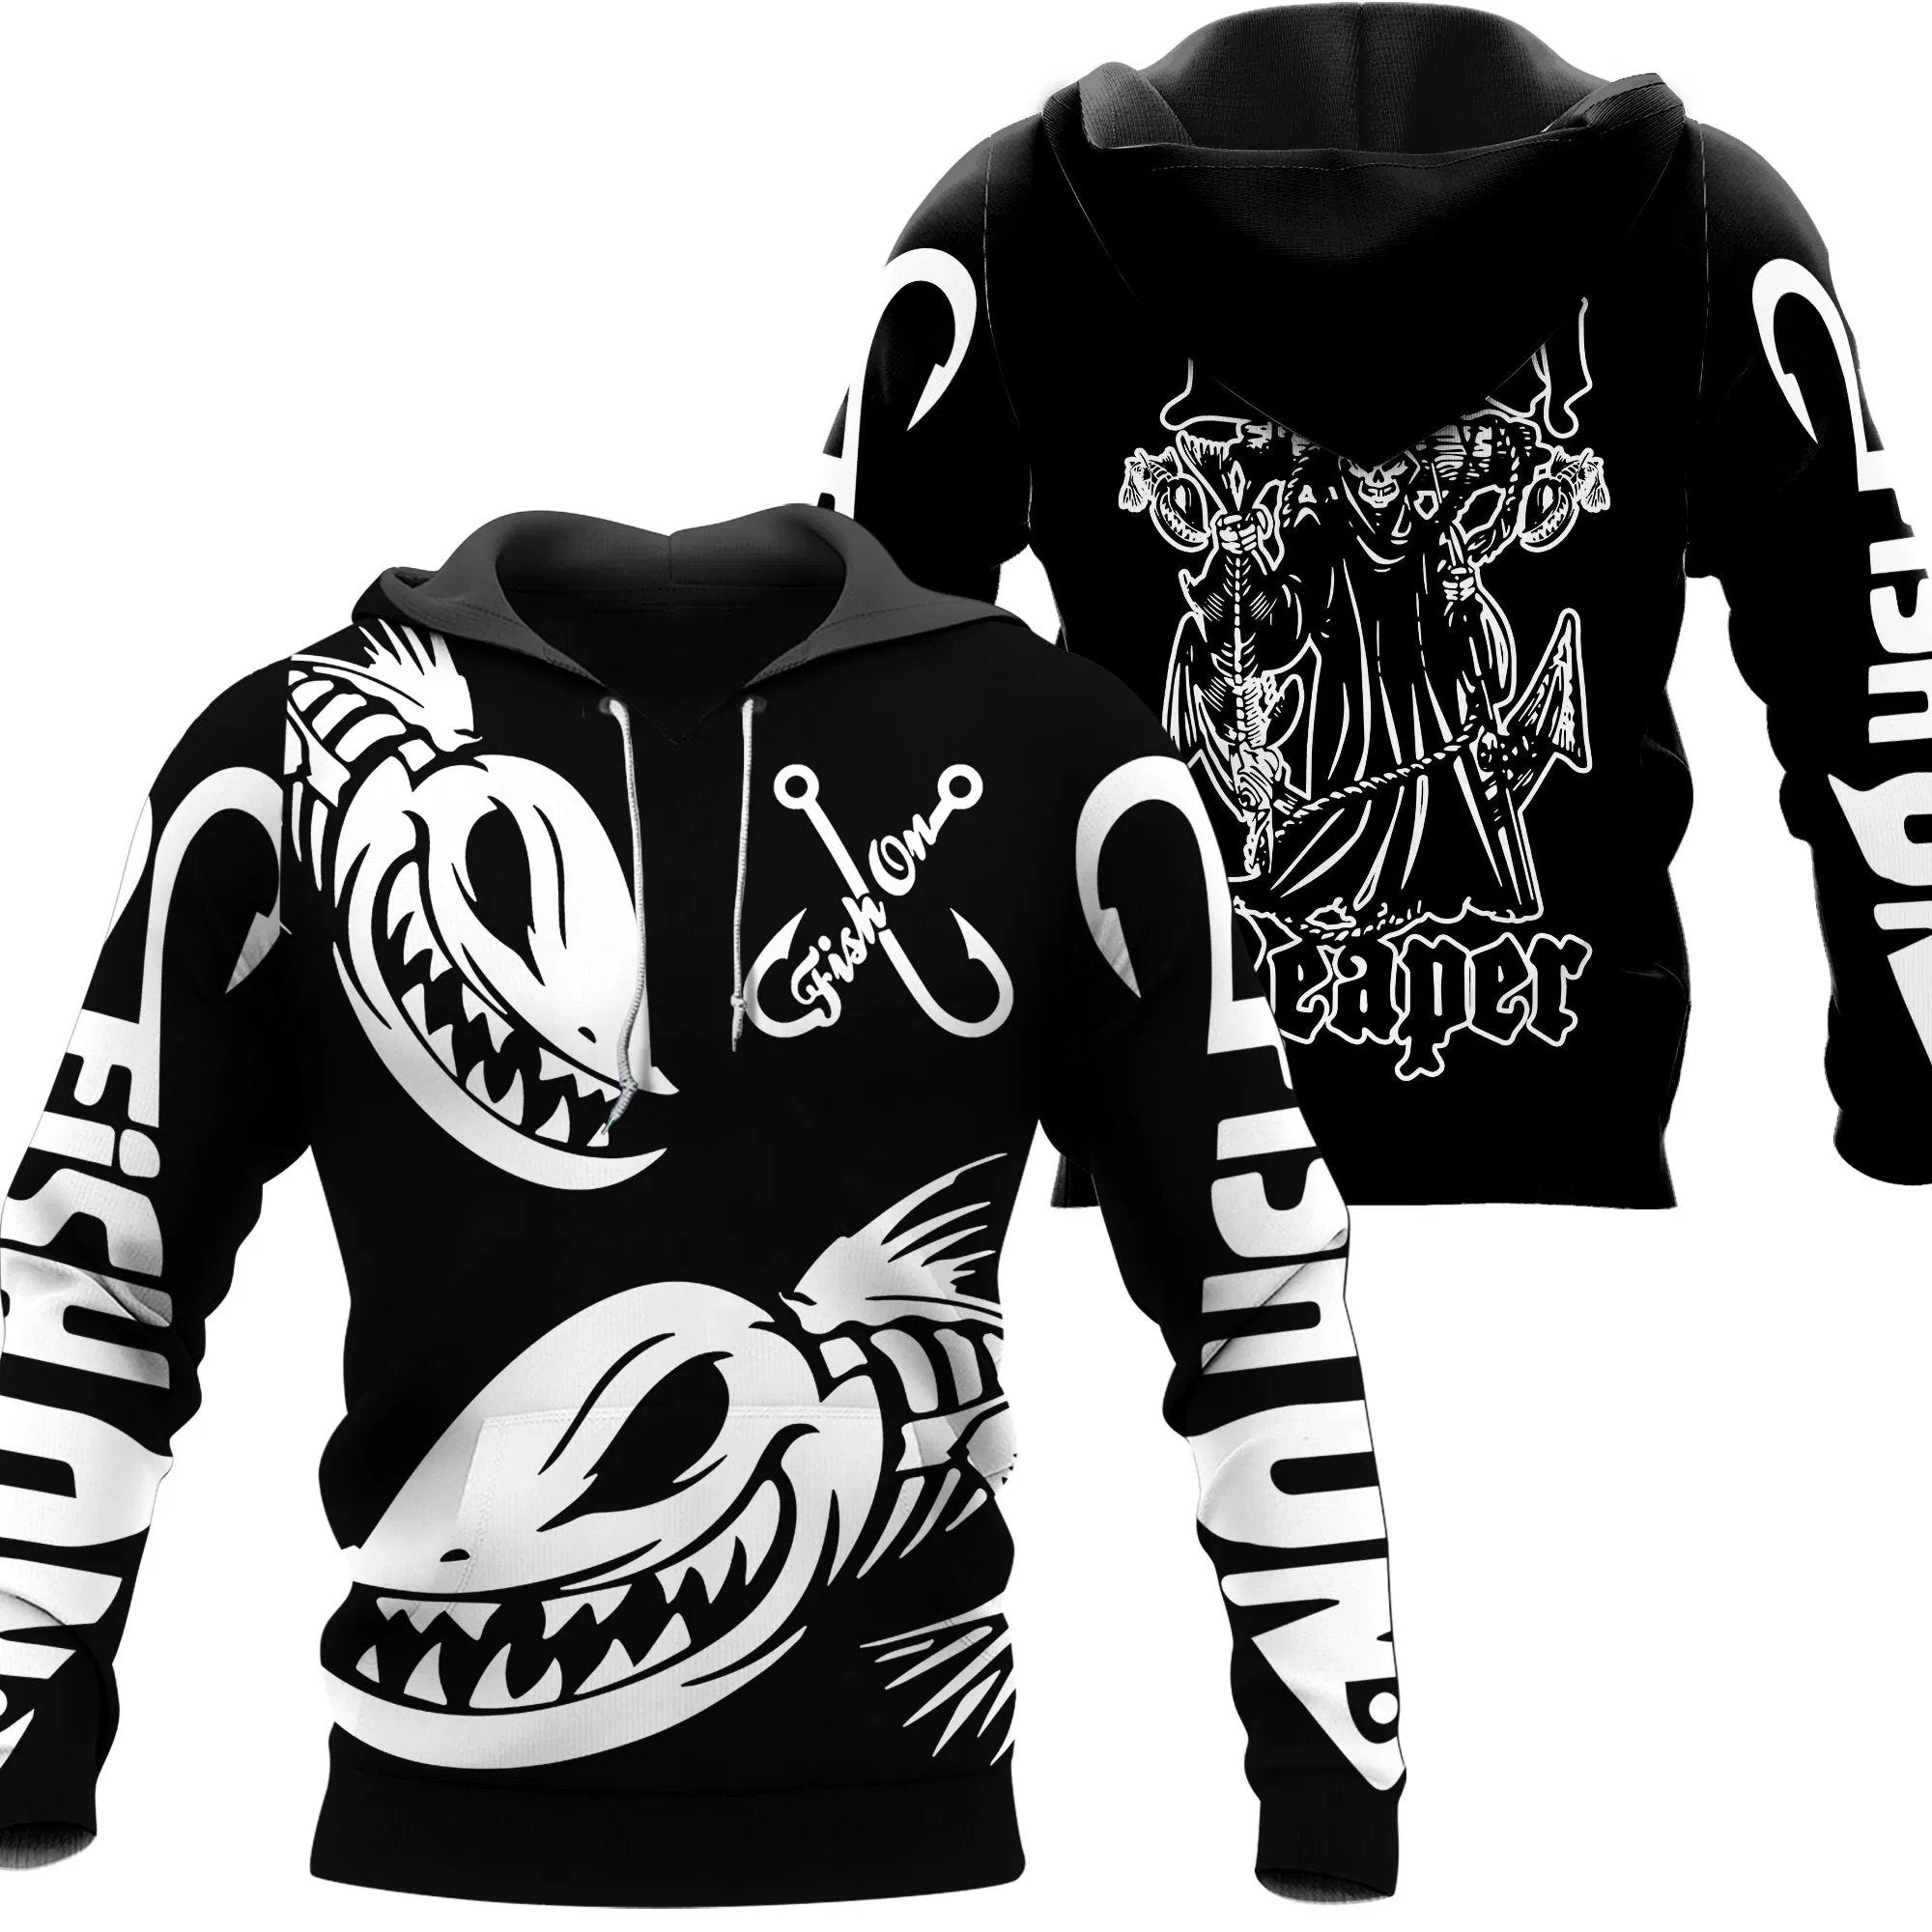 Fish Reaper hoodie. Black with white text. Two big angry fish on front. 